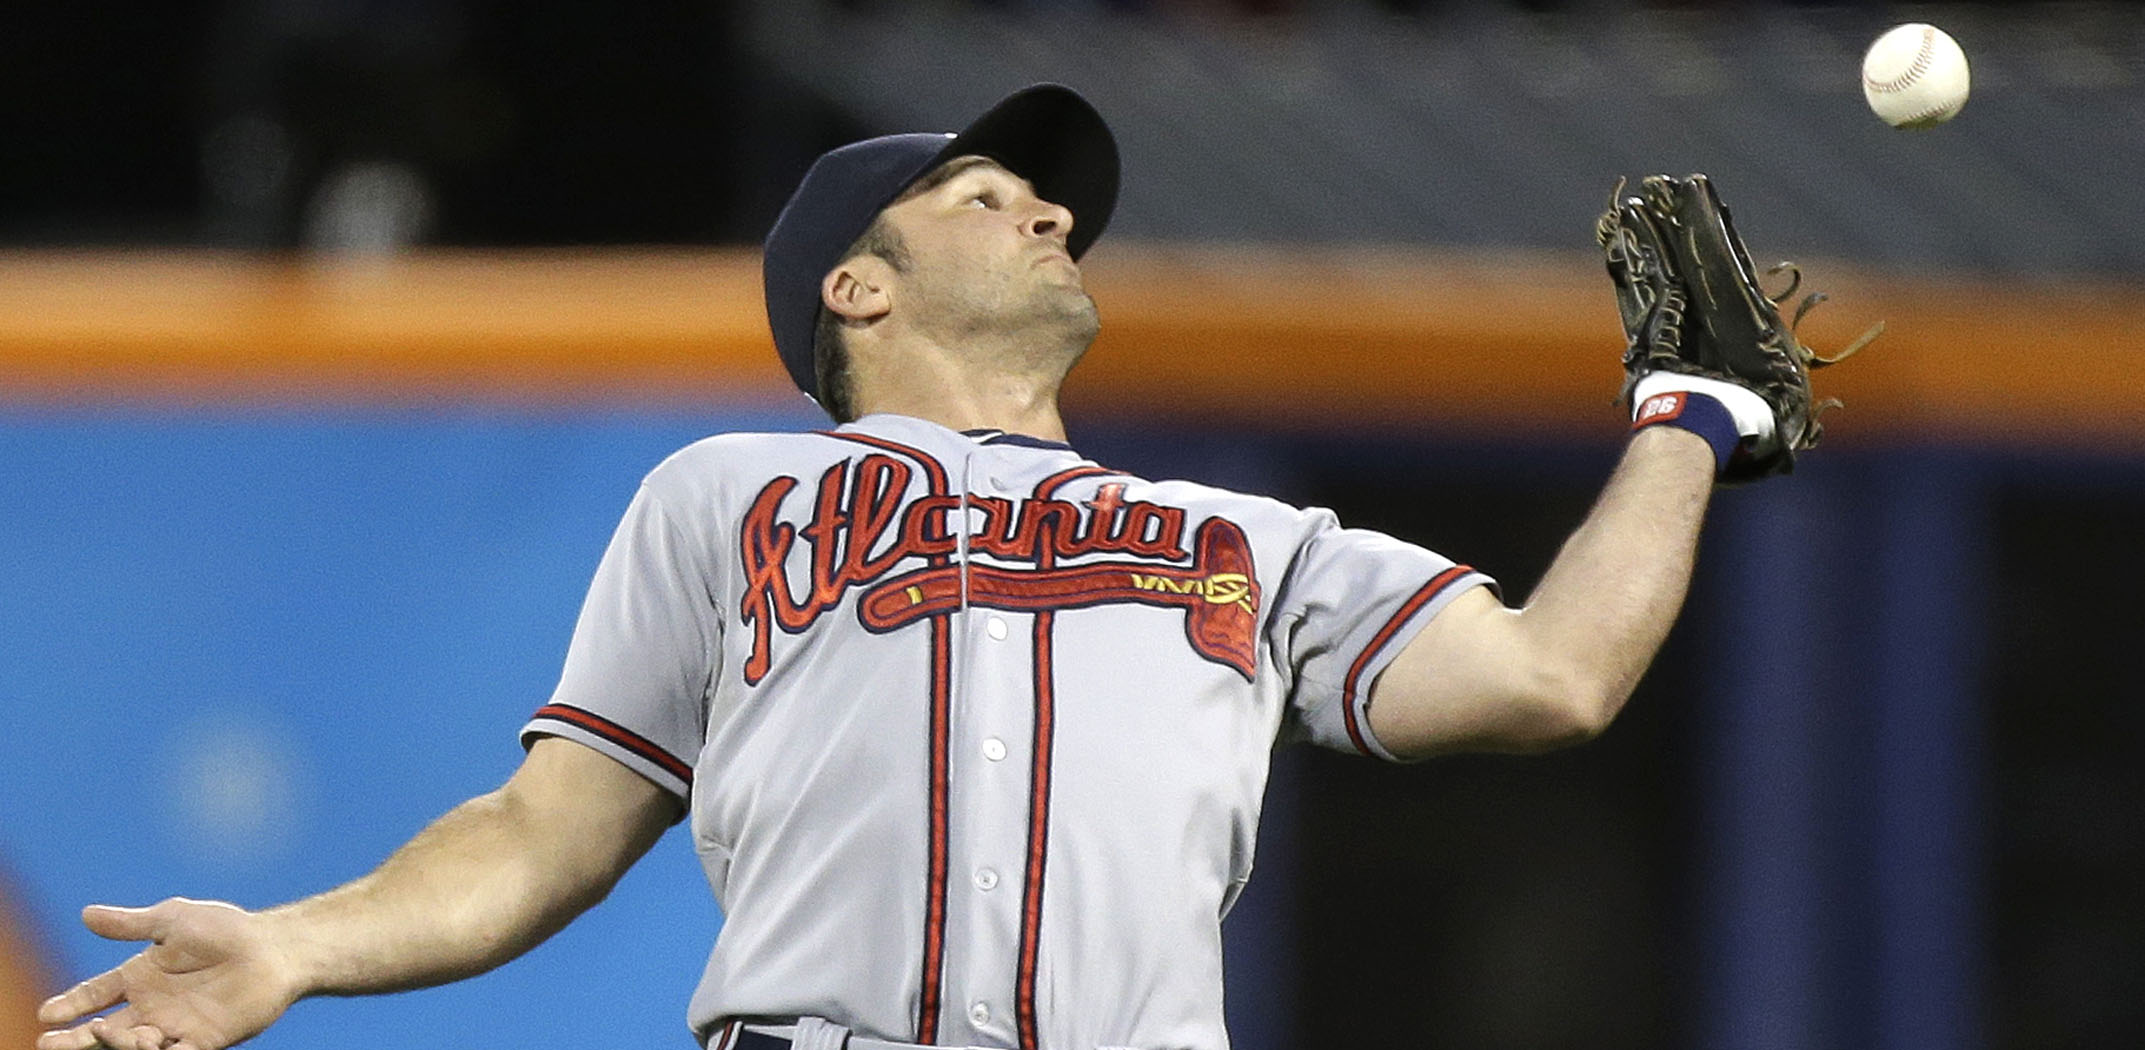 Andrelton Simmons makes spectacular play to help Braves beat Mets